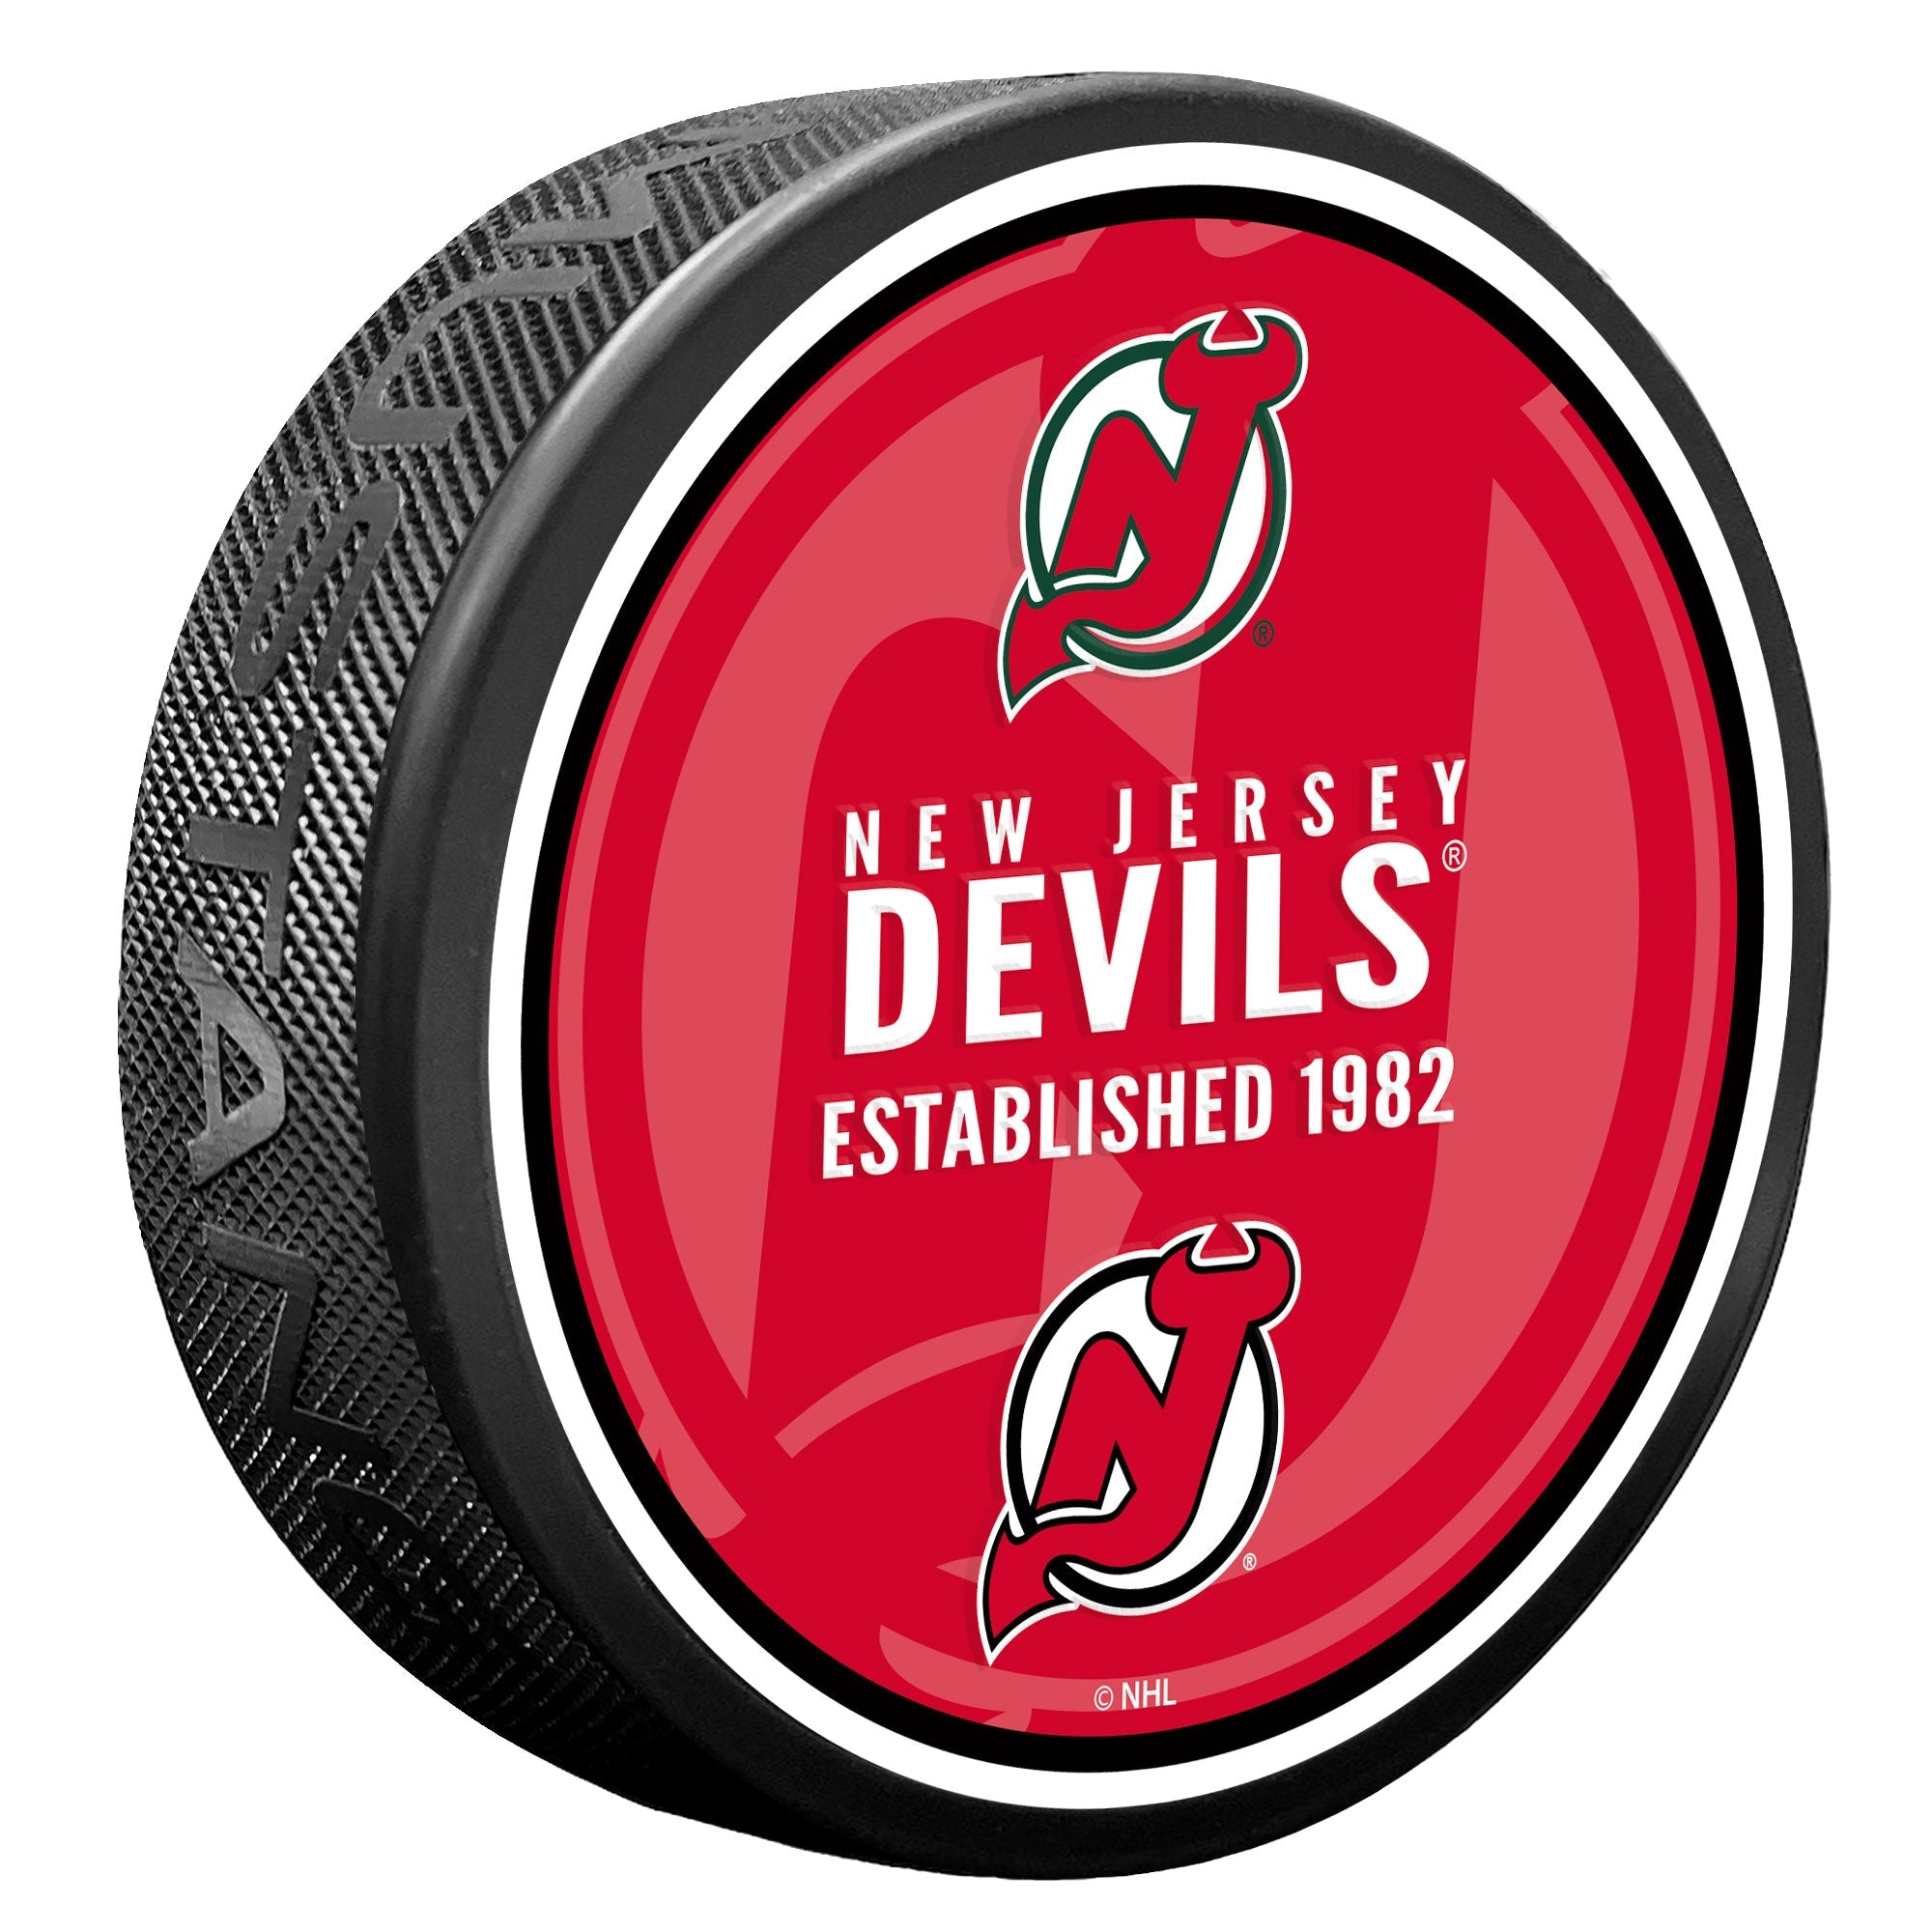 New Jersey Devils Puck - Heritage | Hockey Hall of Fame Shop